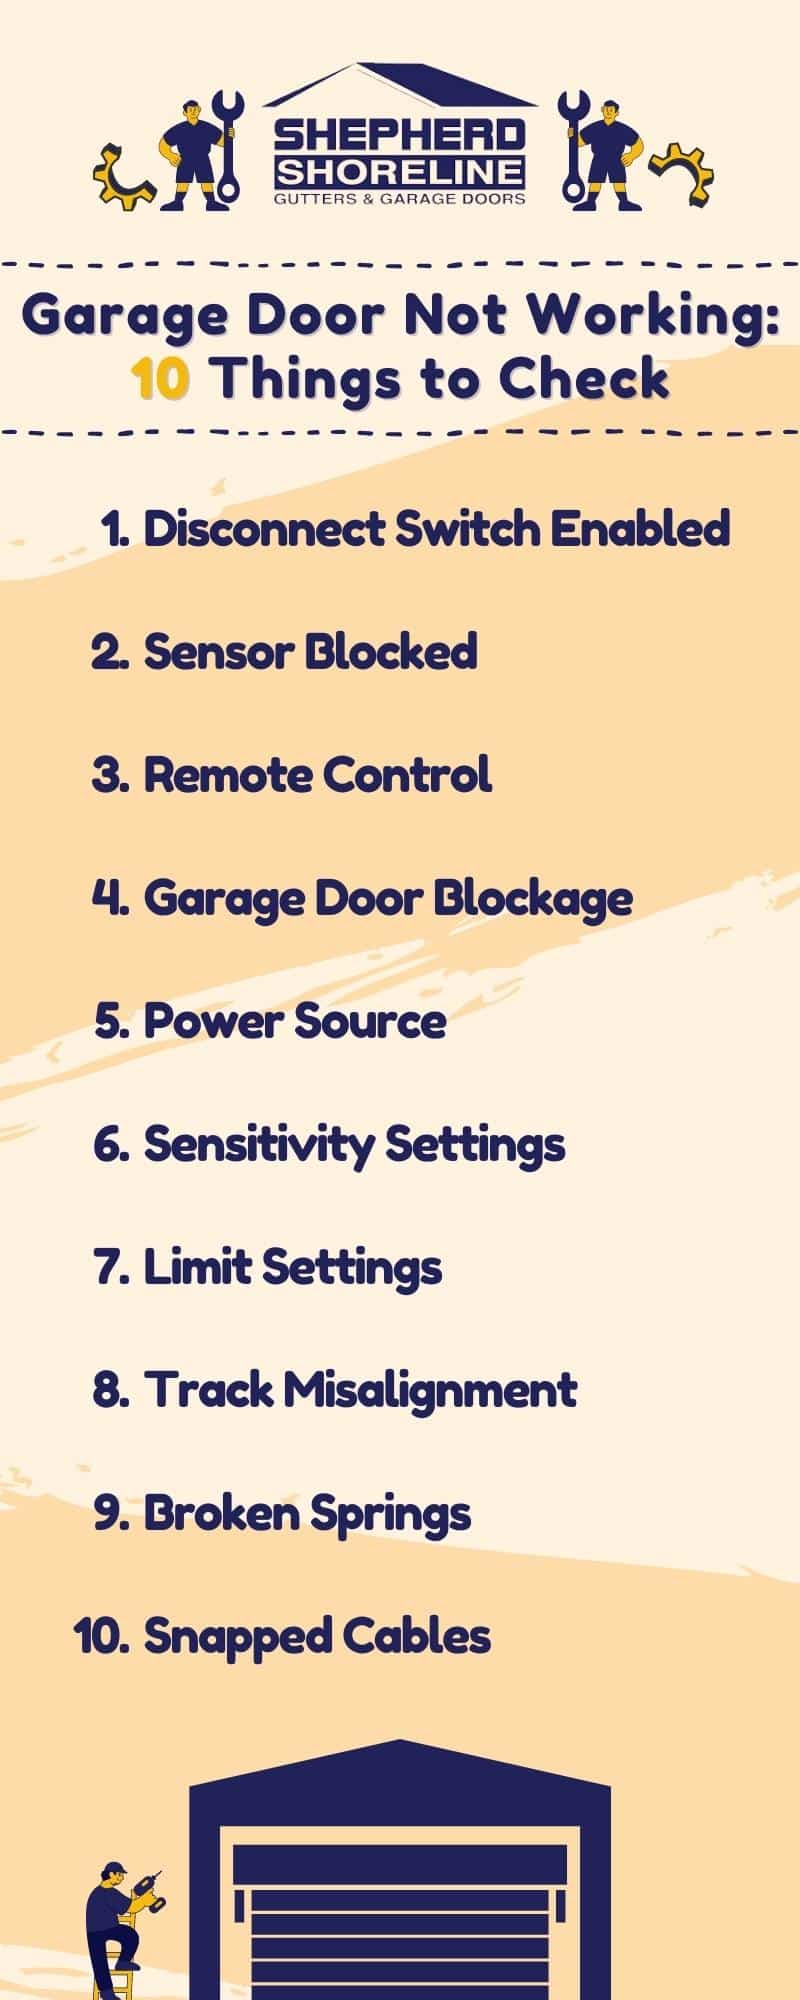 Infographic about garage door is not working and what to inspect